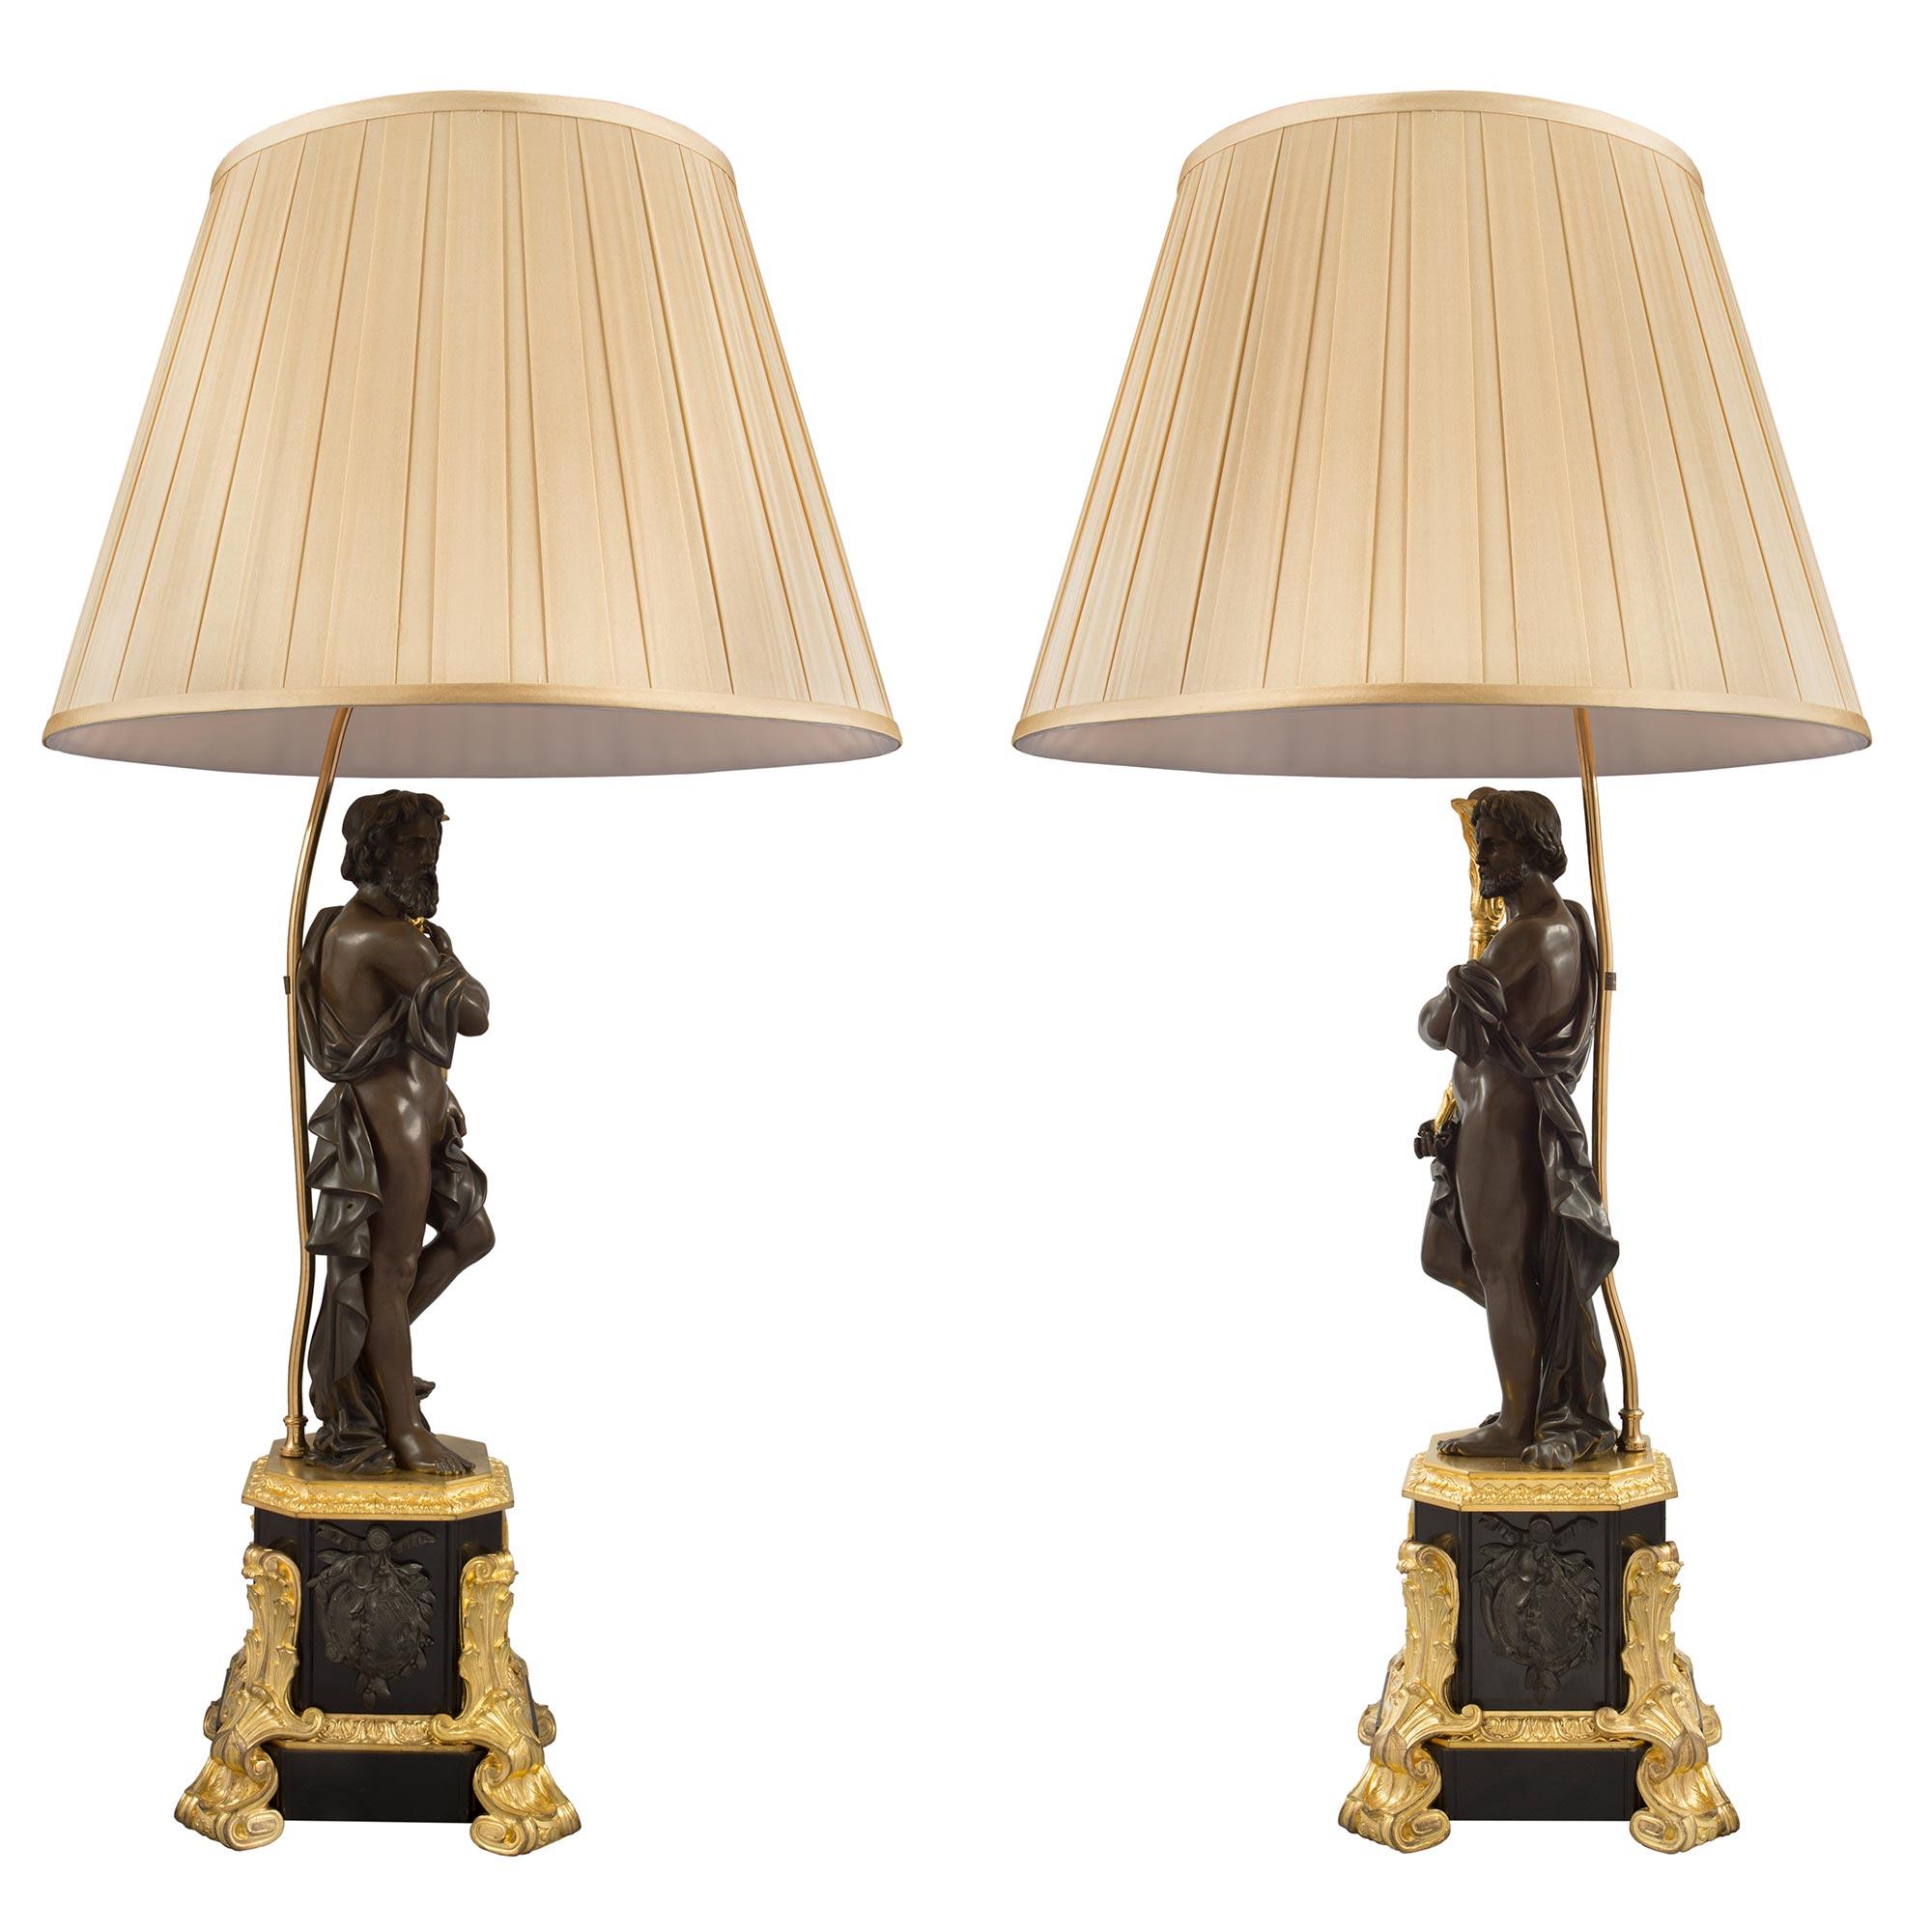 A most impressive pair of French 19th century Renaissance style patinated bronze and ormolu lamps. Each lamp is raised by striking scrolled and foliate designed ormolu feet leading up the sides of the square base. At the front are beautiful and